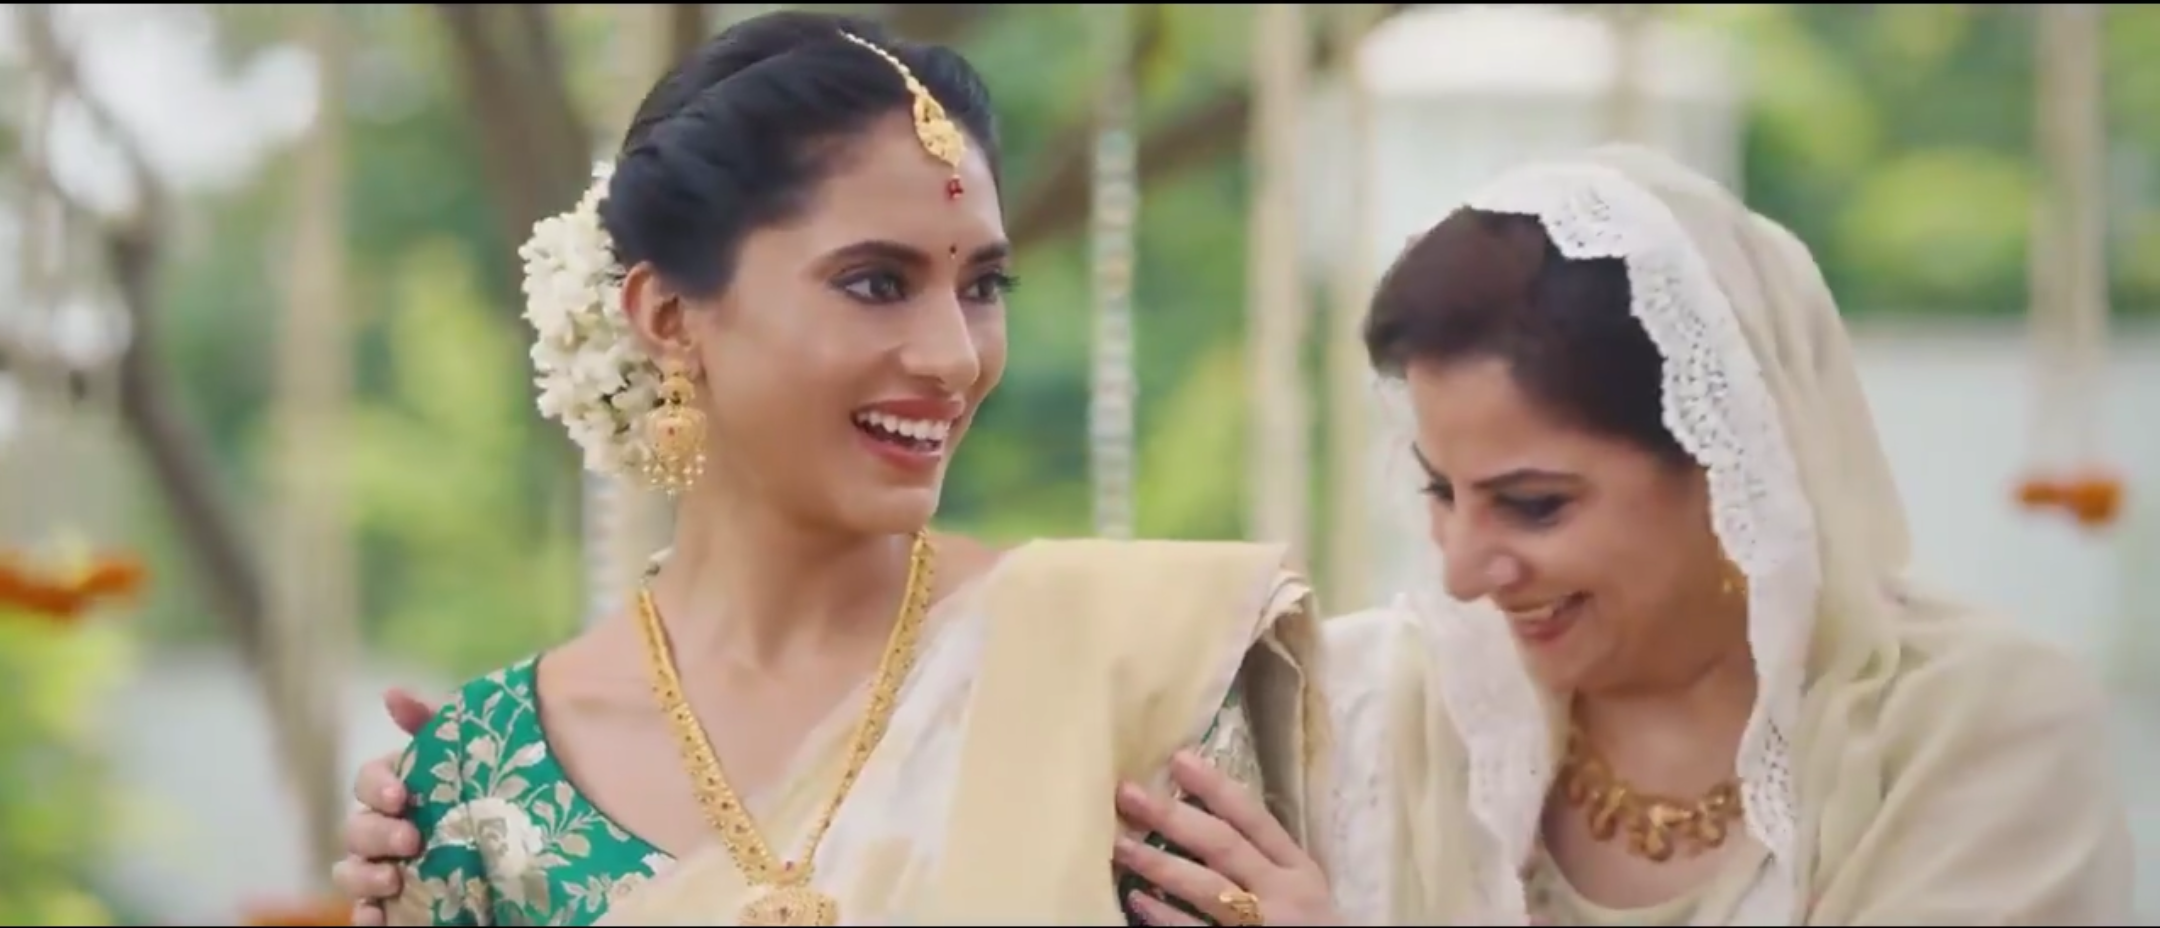 Brand Pulls Ad Featuring Muslim Man And Hindu Wife After Complaints Of ...